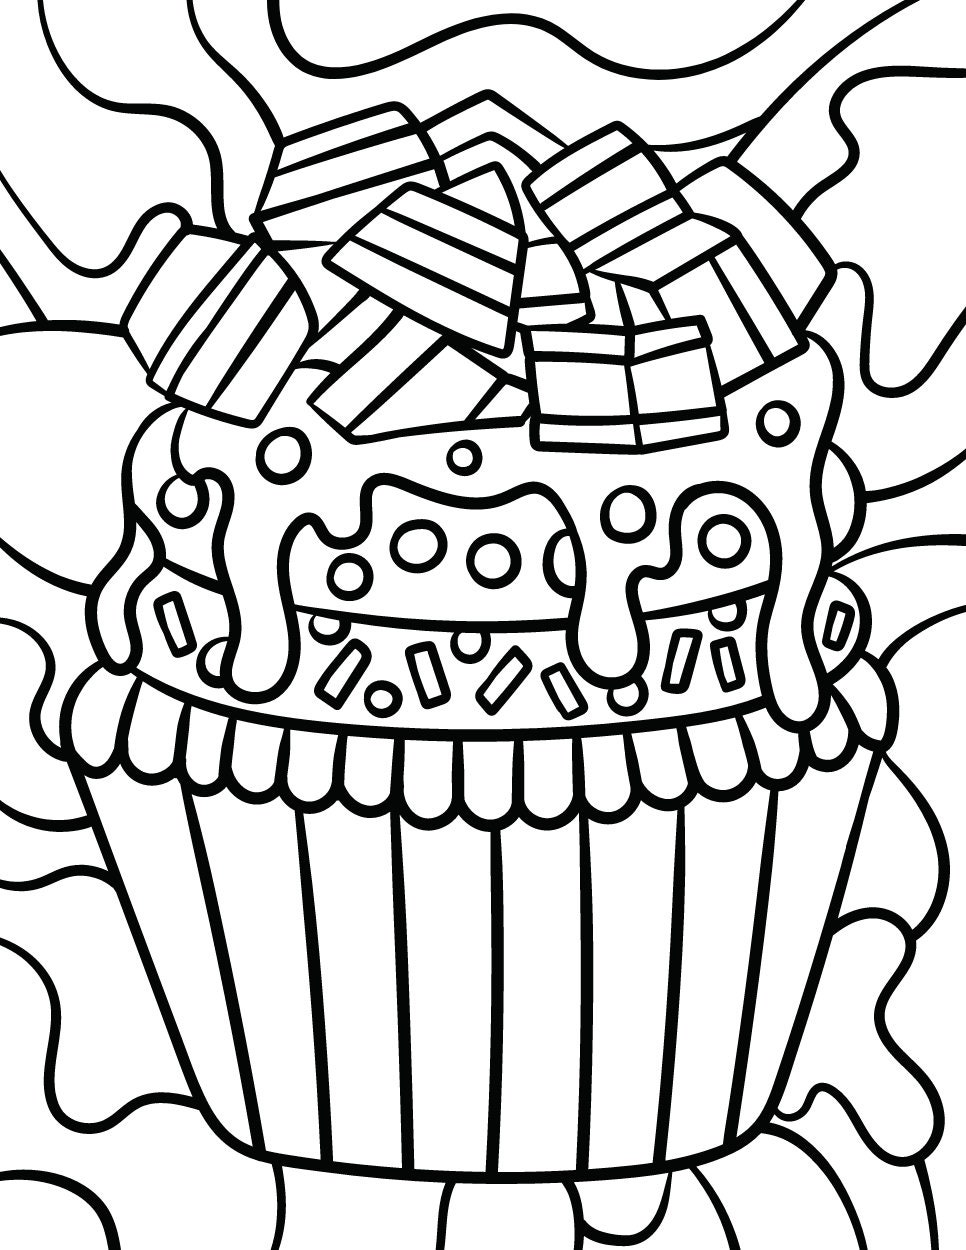 Adorable Sweet Treats Coloring Book: Fun And Cute Cupcakes, Lovely  Illustrations Of Delicious Desserts Provides Relaxation, Easy Coloring  Pages For Toddlers Kids Adults Colorists - Lotus, Southern, 9798373523462